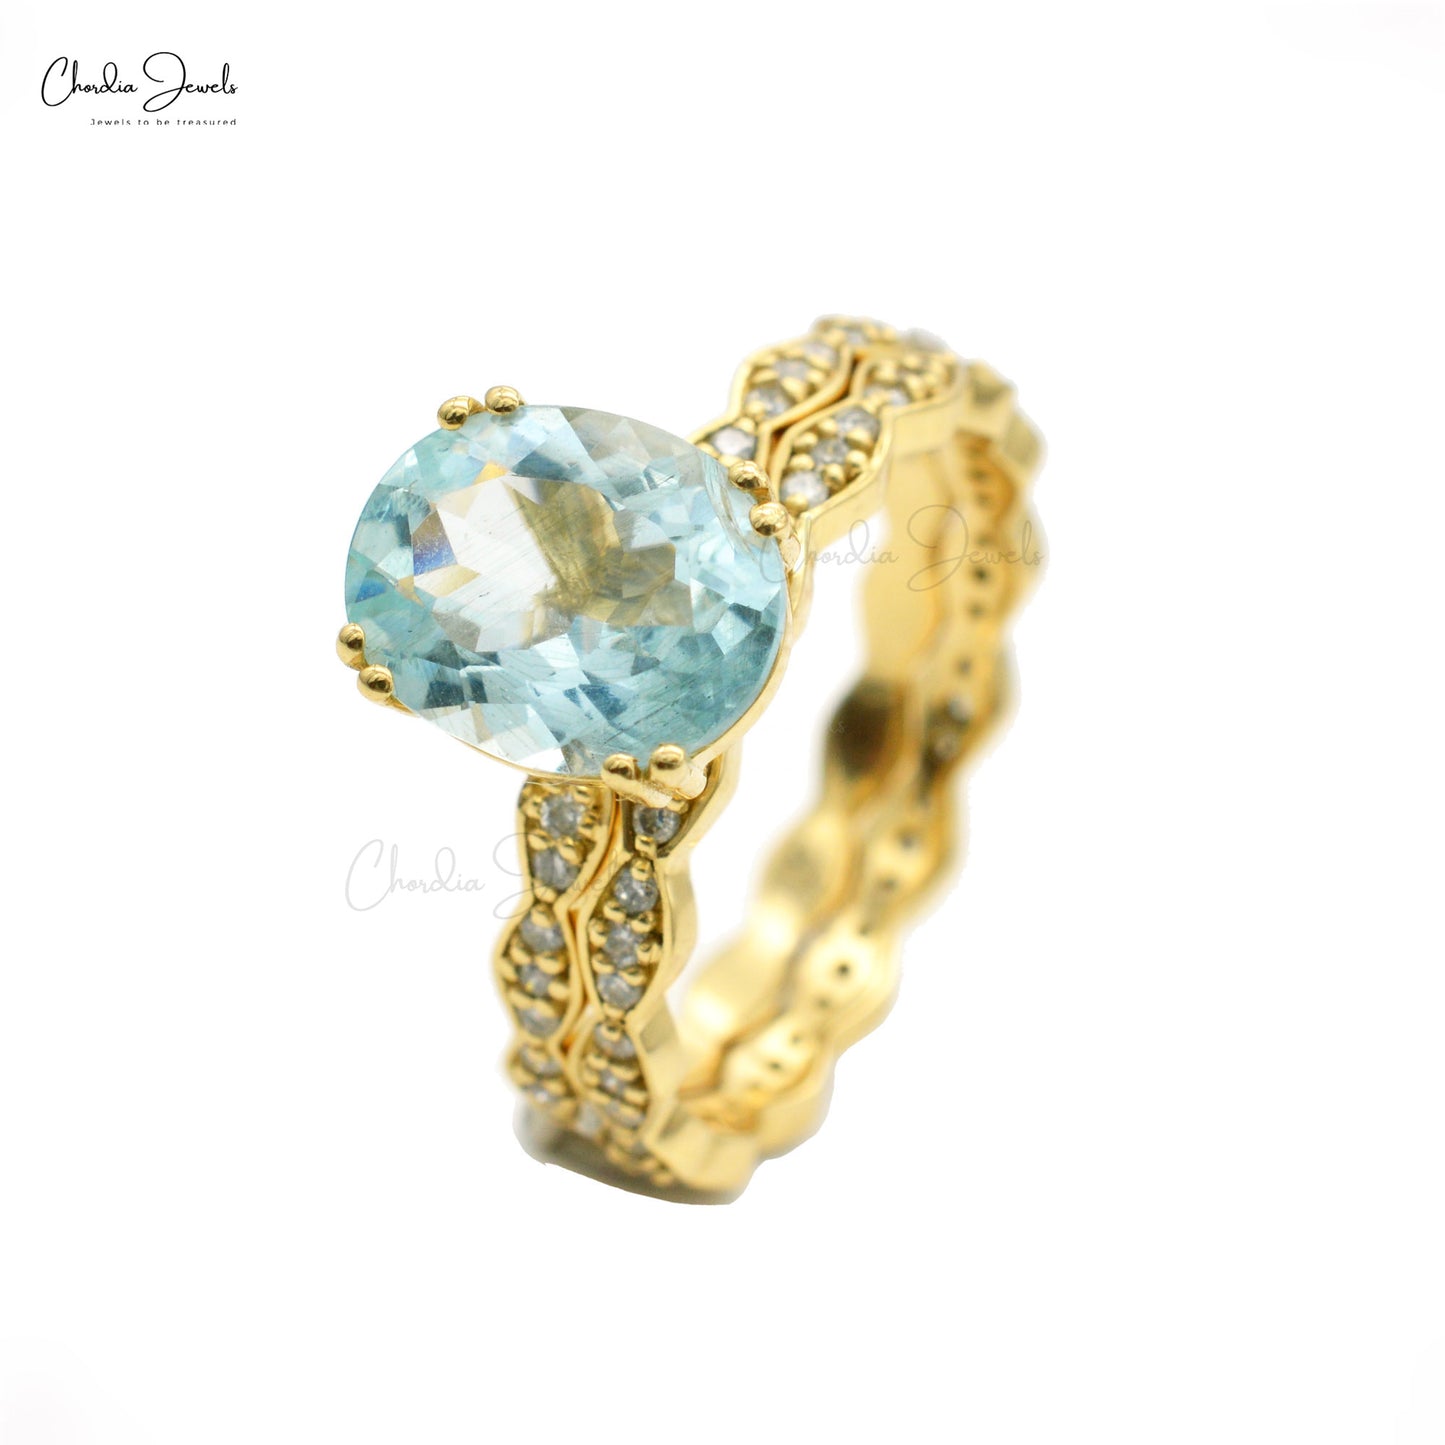 Load image into Gallery viewer, Vintage Gorgeous Natural Aquamarine Statement Ring 1.92 Ct Gemstone Stackable Ring 14k Solid Gold White Diamond Wedding Band Hallmarked Jewelry For Valentine
